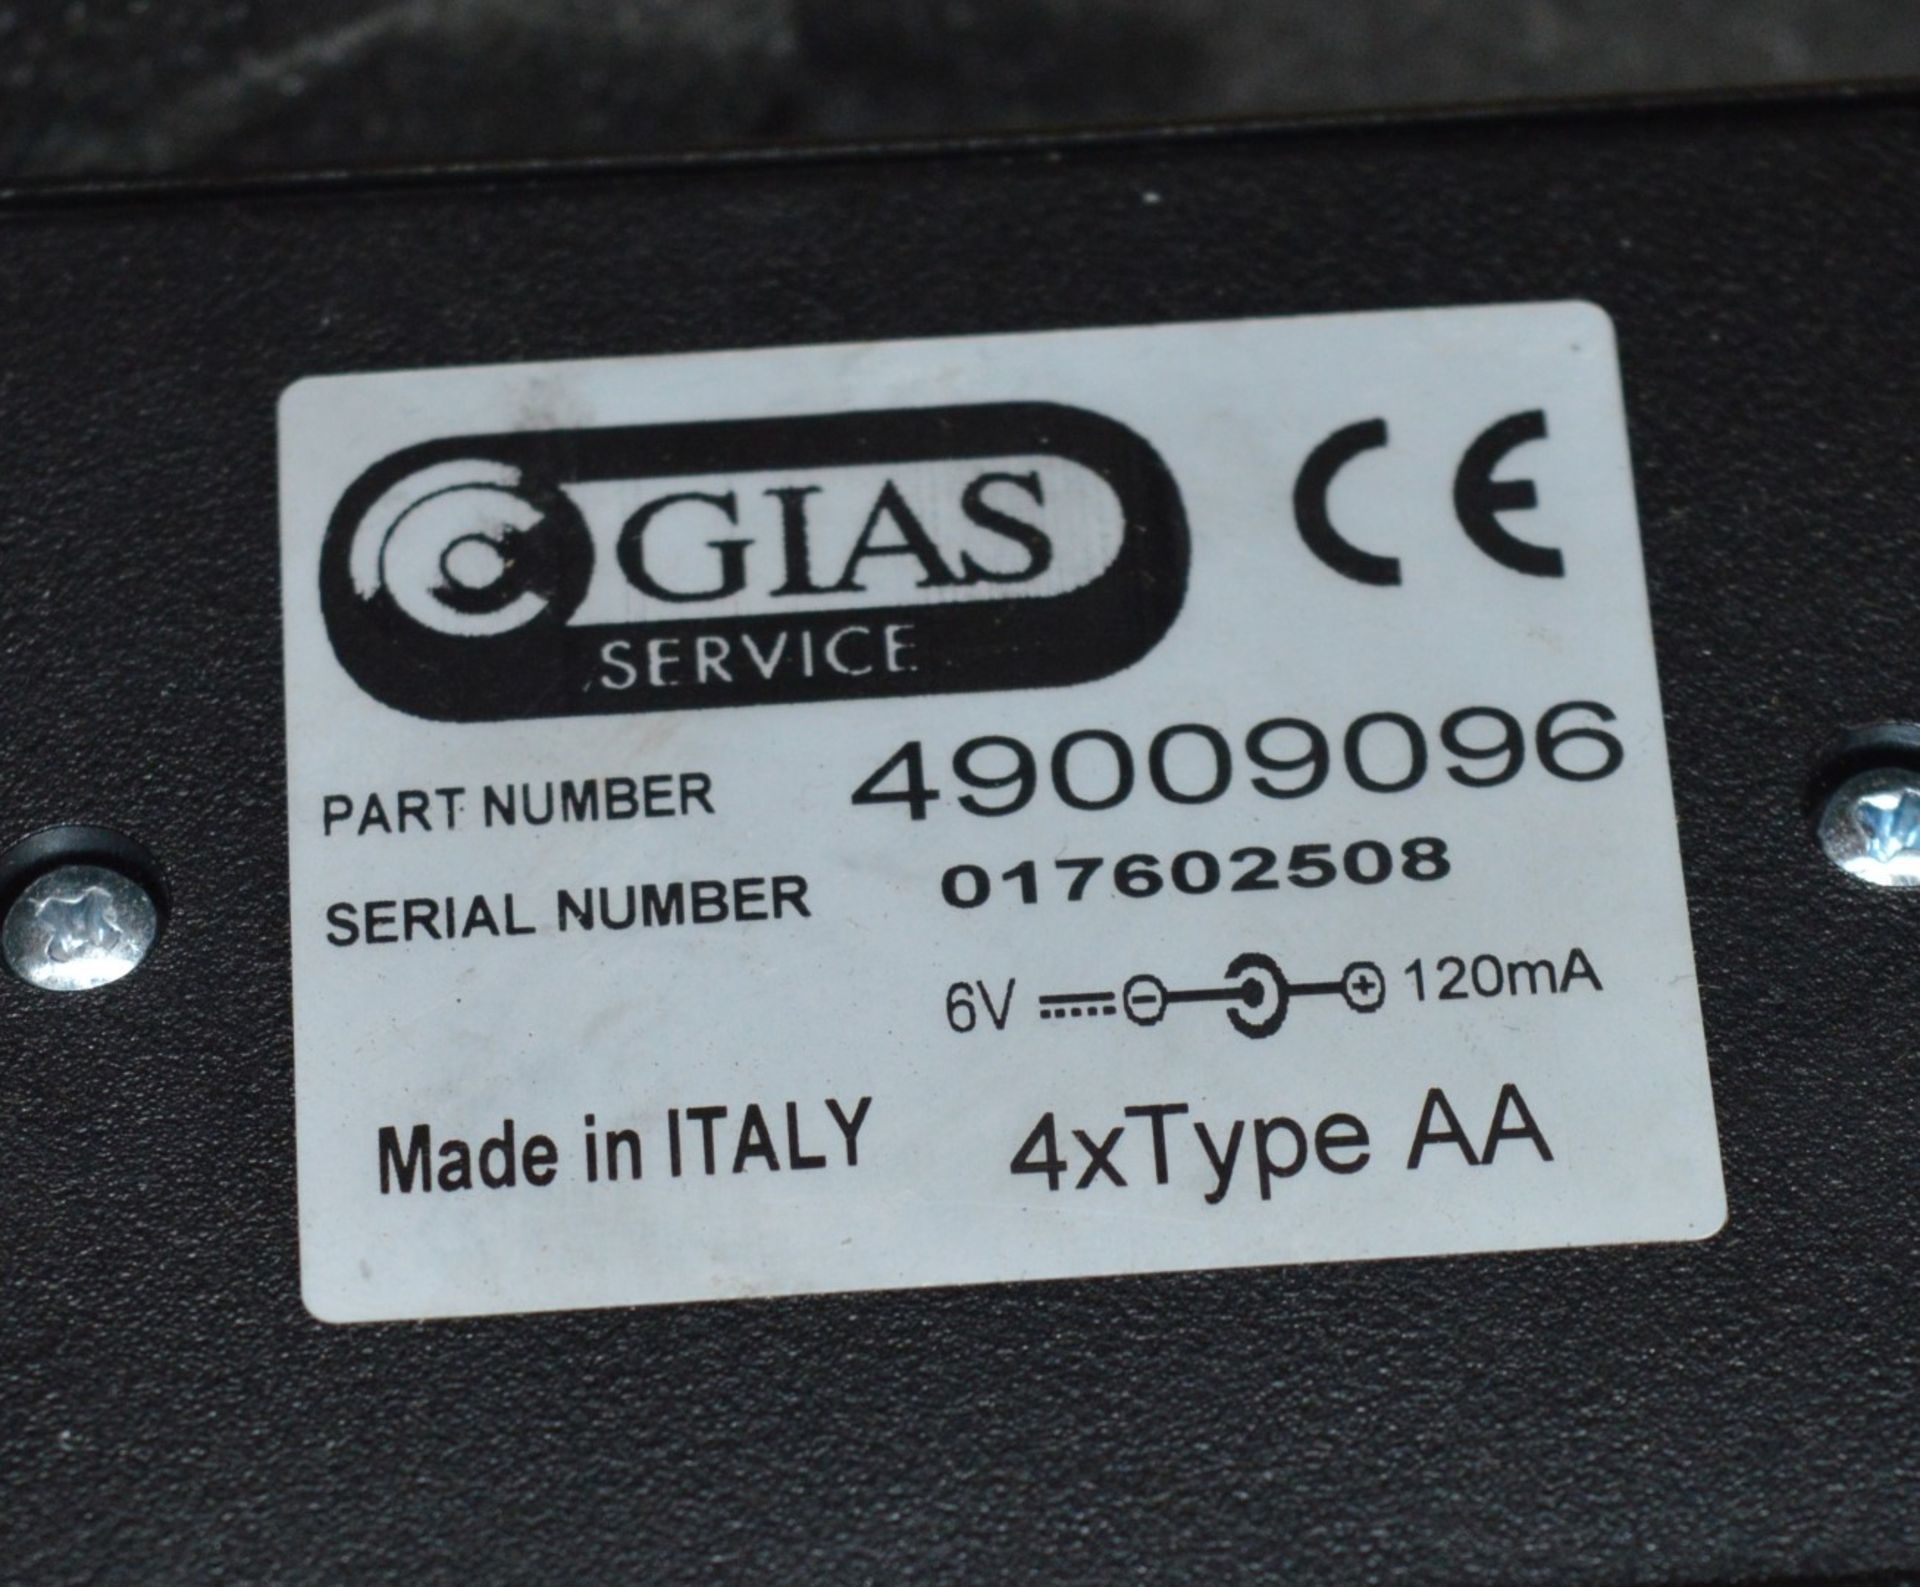 1 x Gias Candy Module EEPROM Manager - Model 49009096 - Boxed With Accessories - Working Order - - Image 2 of 6